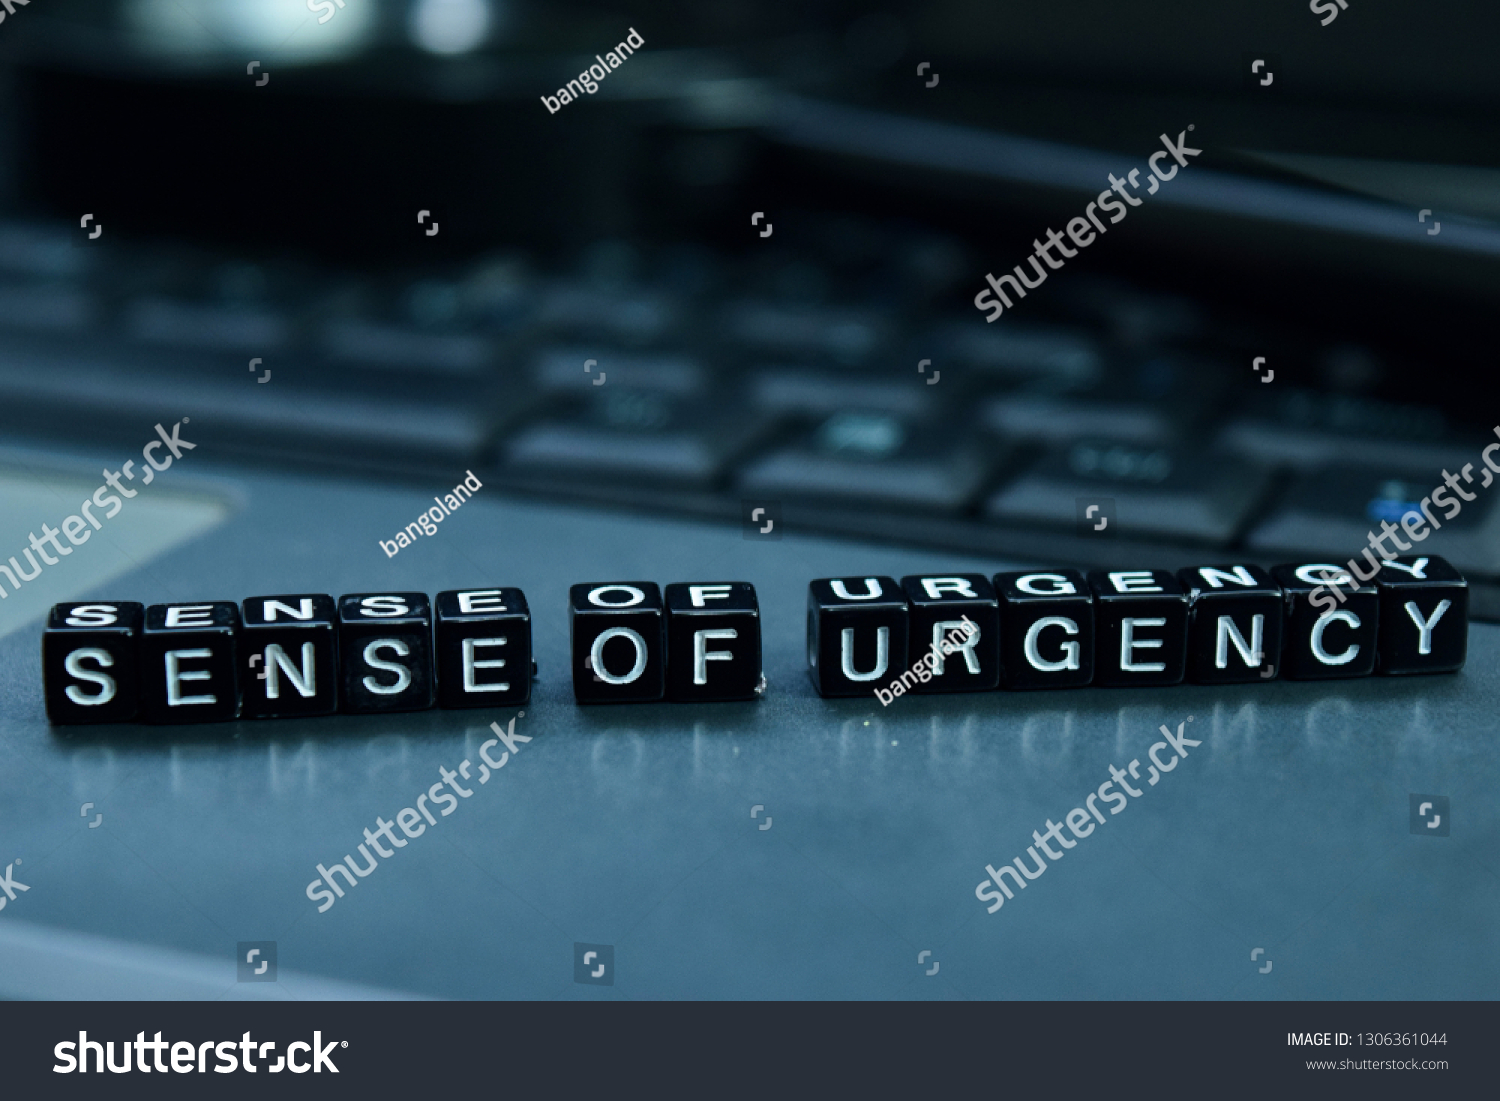 Sense of urgency text wooden blocks in laptop background. Business and technology concept #1306361044